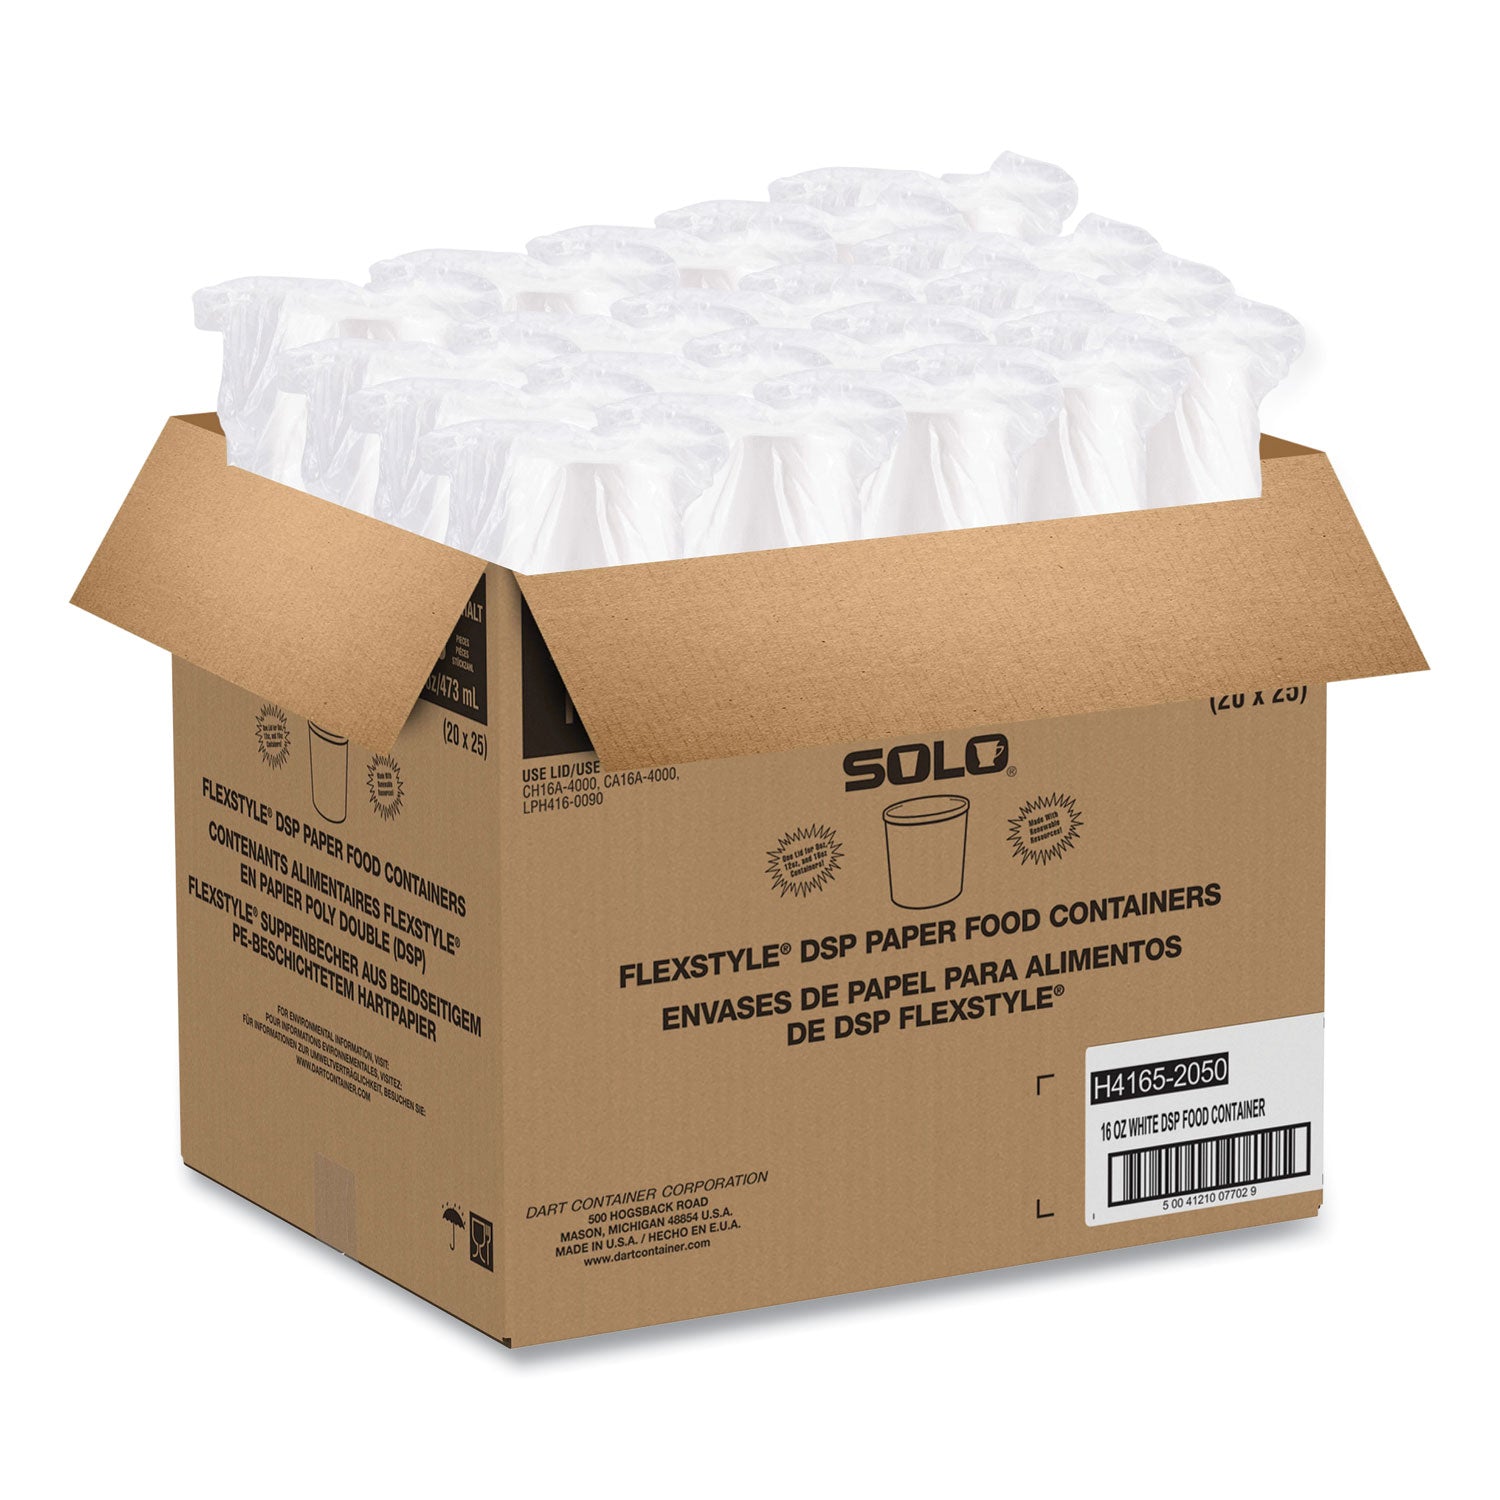 flexstyle-double-poly-paper-containers-16-oz-white-paper-25-pack-20-packs-carton_scch4165u - 7